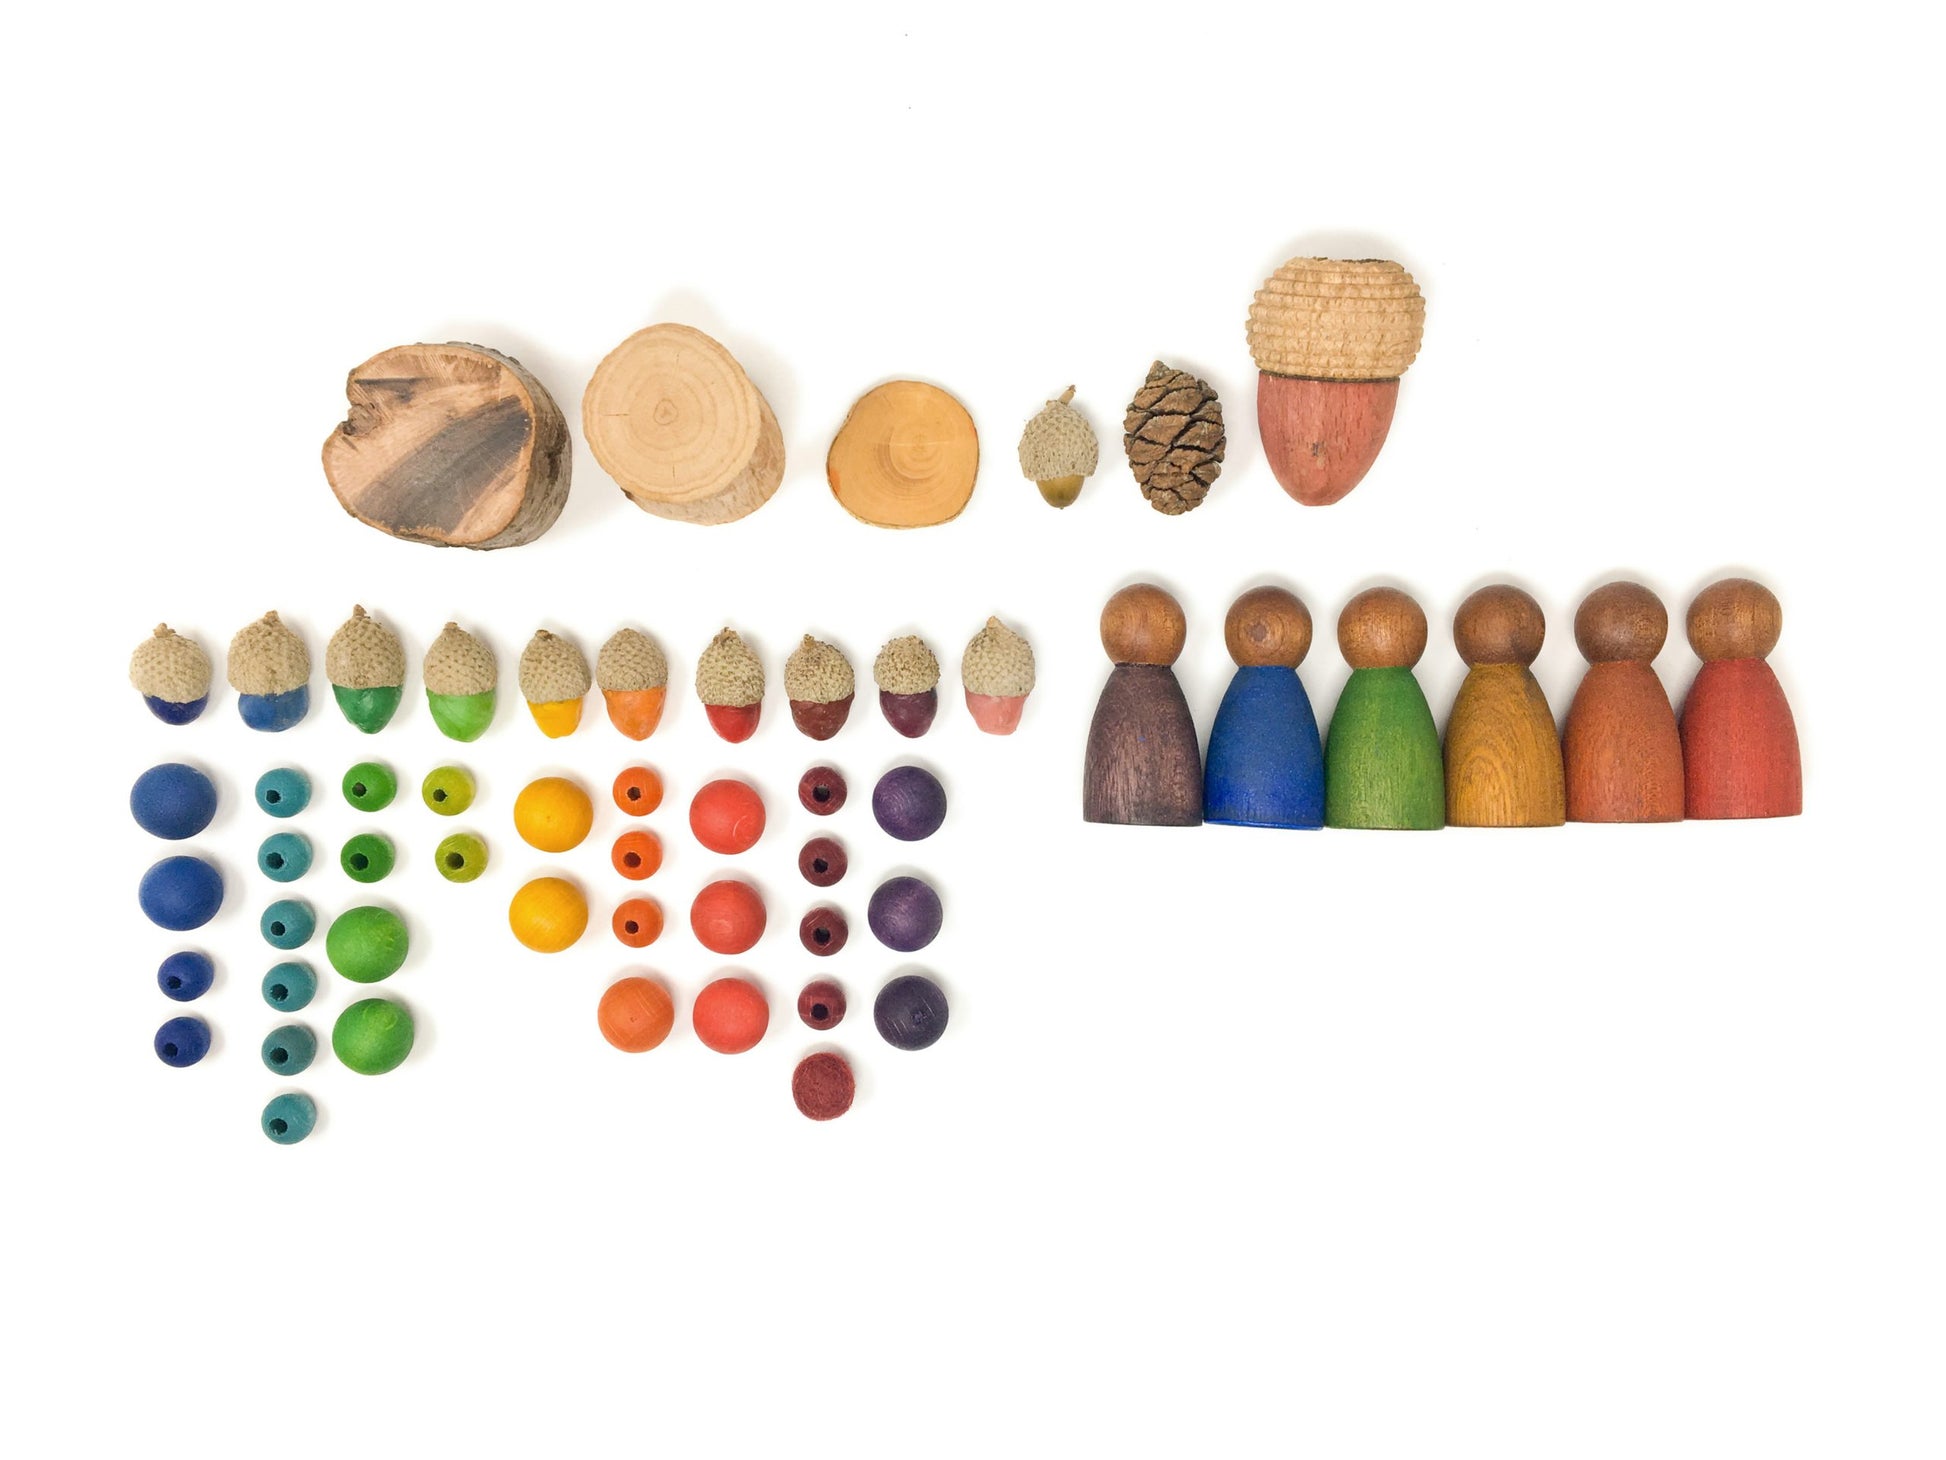 A series of small elements arranged on a plain surface. On top, three round pieces of wood, a small acorn, a pinecone, and a large acorn are arranged in a row. Below and to the left, small acorns and beads of various sizes are arranged in columns based on their color. To the right, six wooden peg people are arranged in a row based on their color, from left to right in the reverse order of the colors of the rainbow